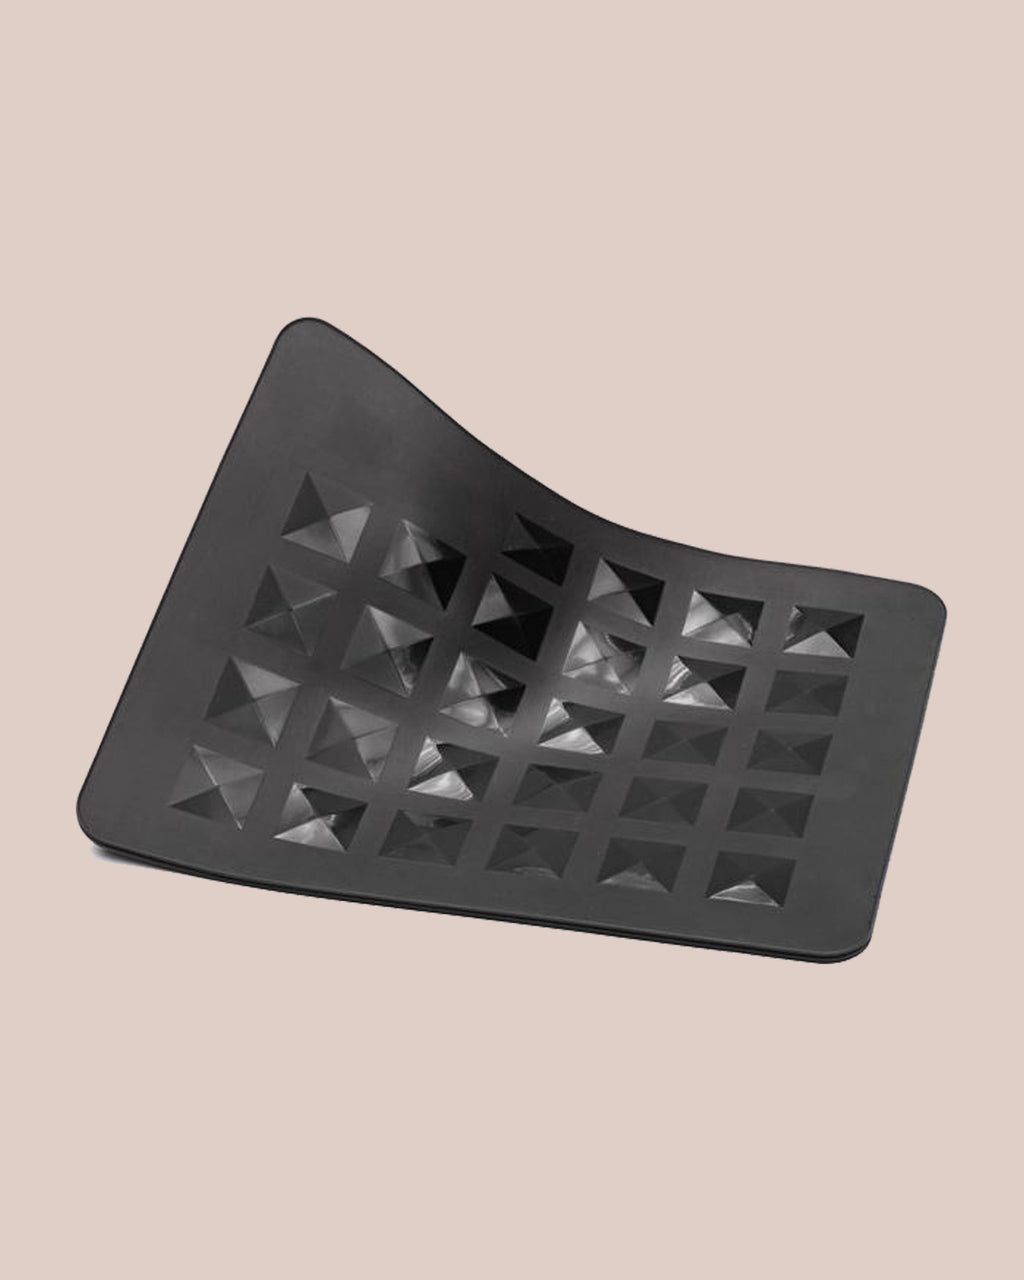 HEAT RESISTANT SILICONE MAT